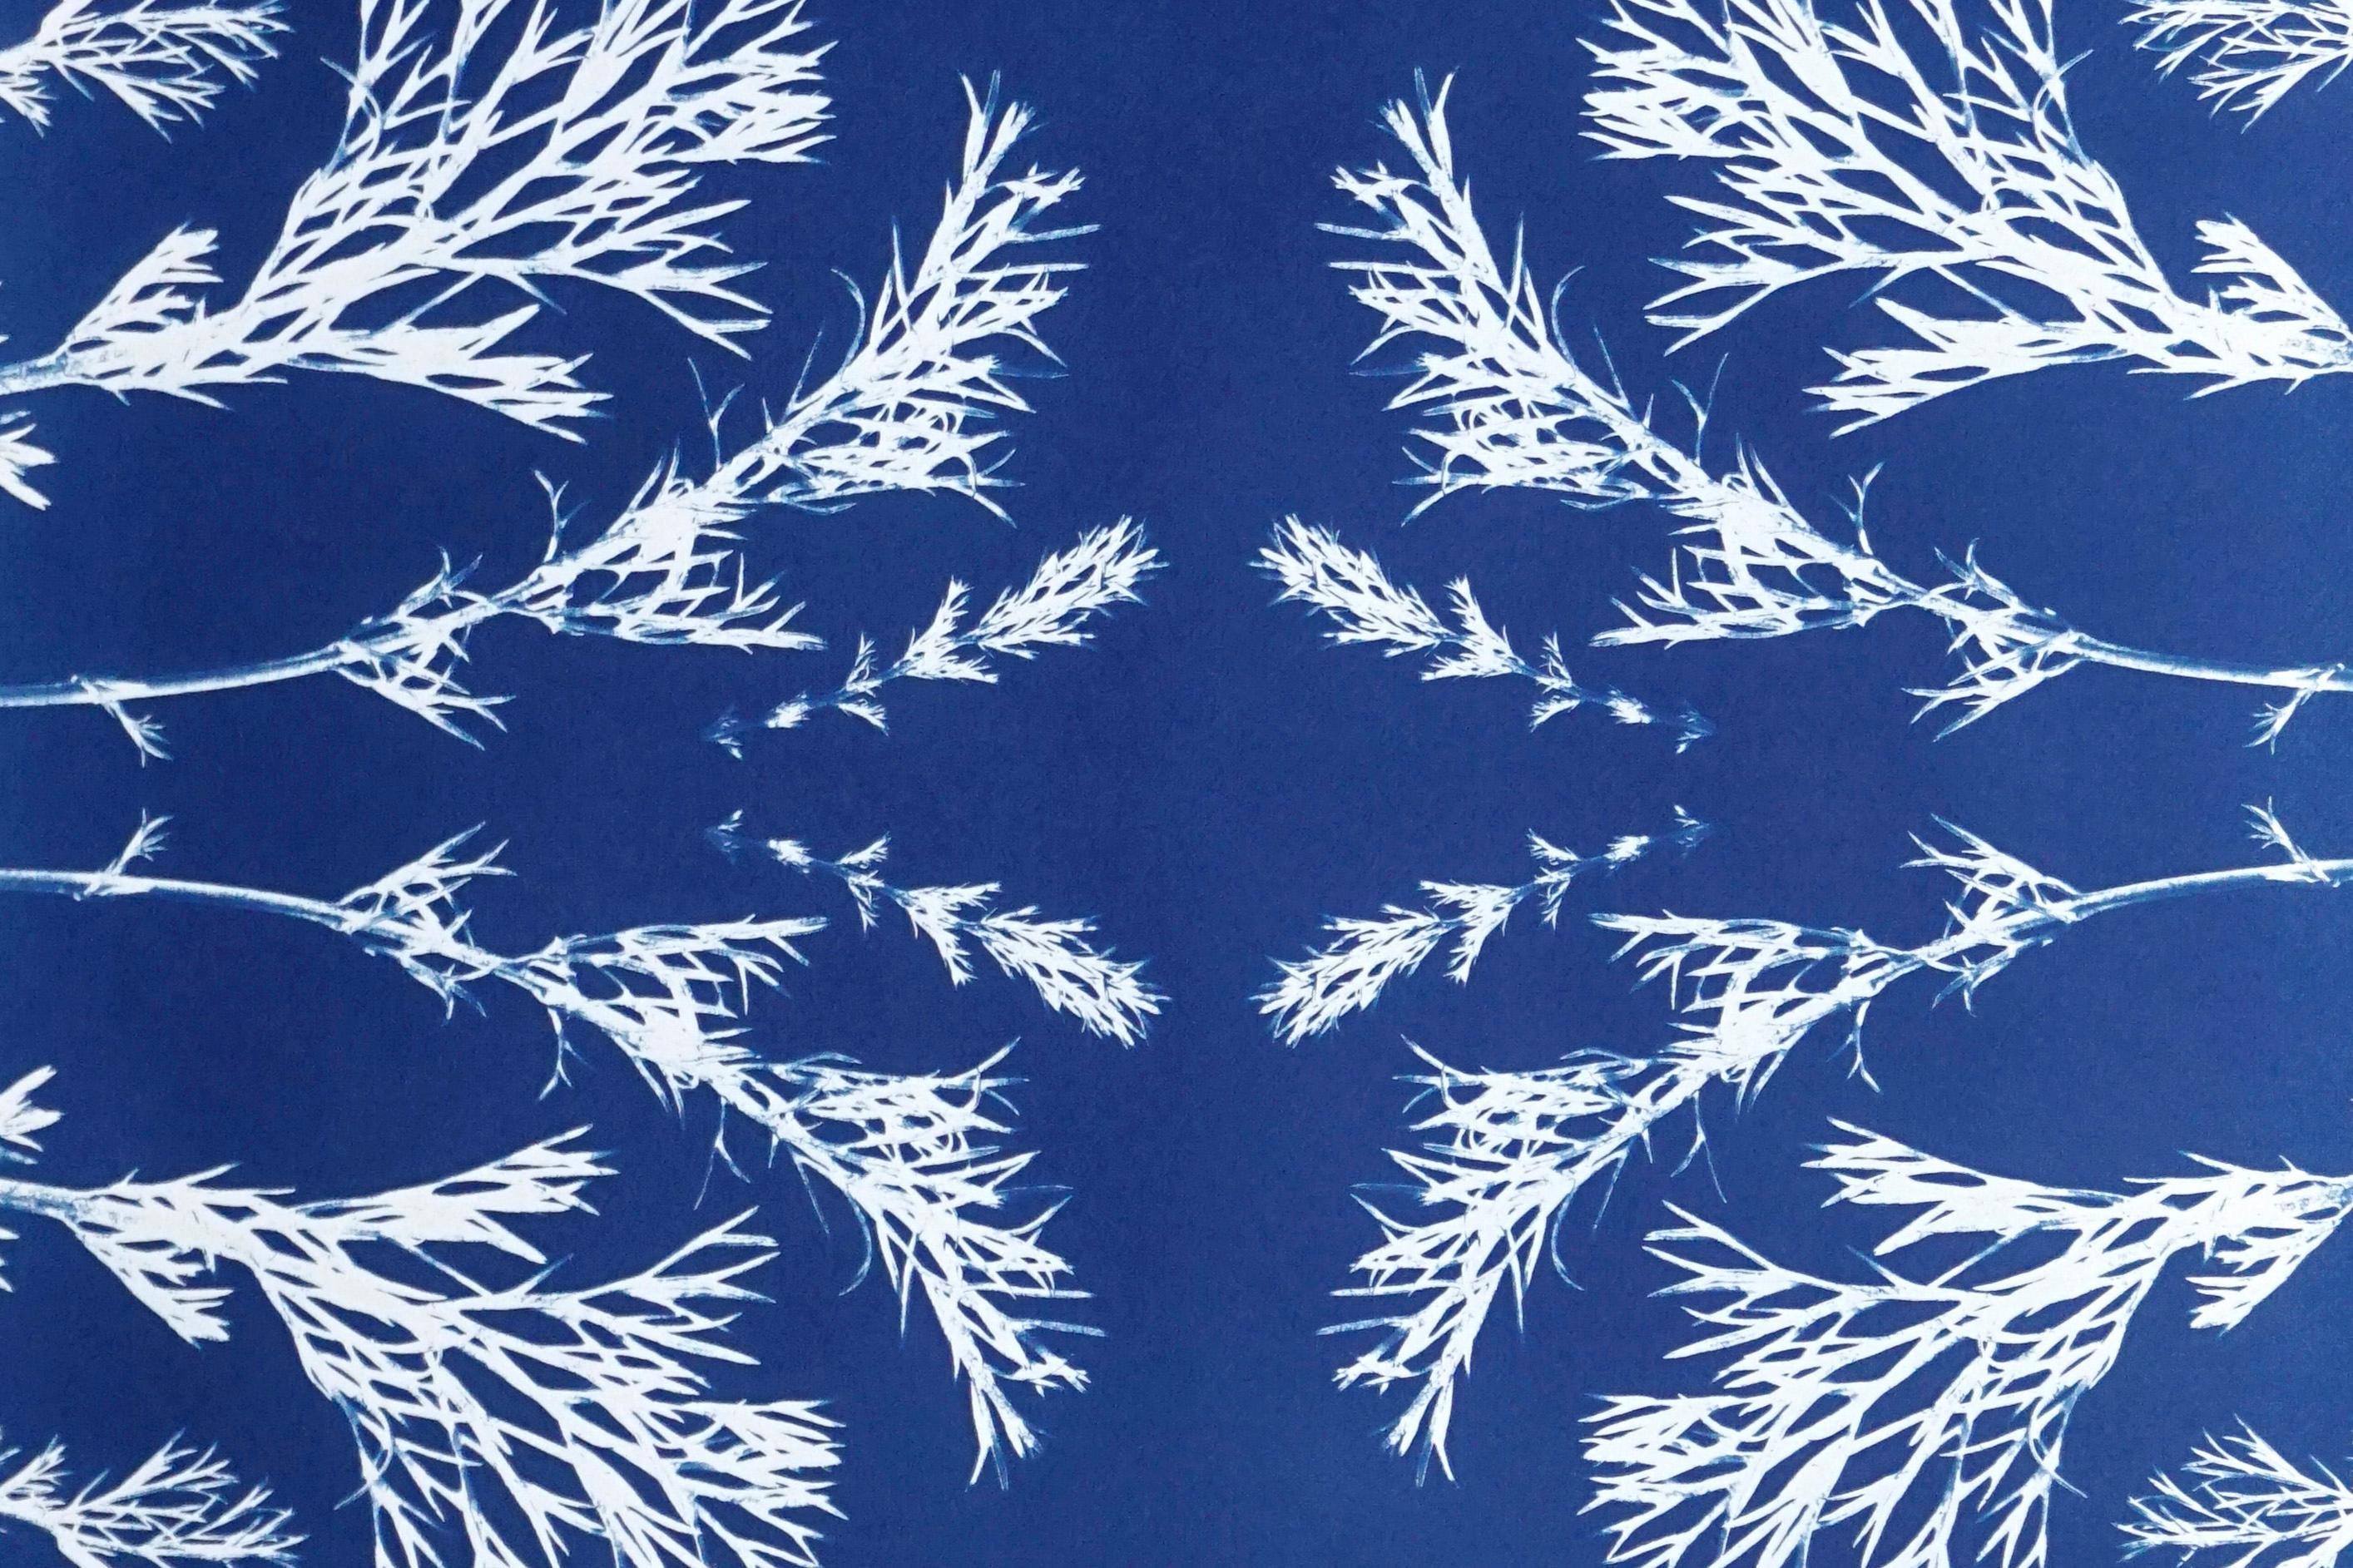 Classic Botanical Cyanotype, Handmade Using Natural Sunlight, Limited Edition  - American Modern Print by Kind of Cyan